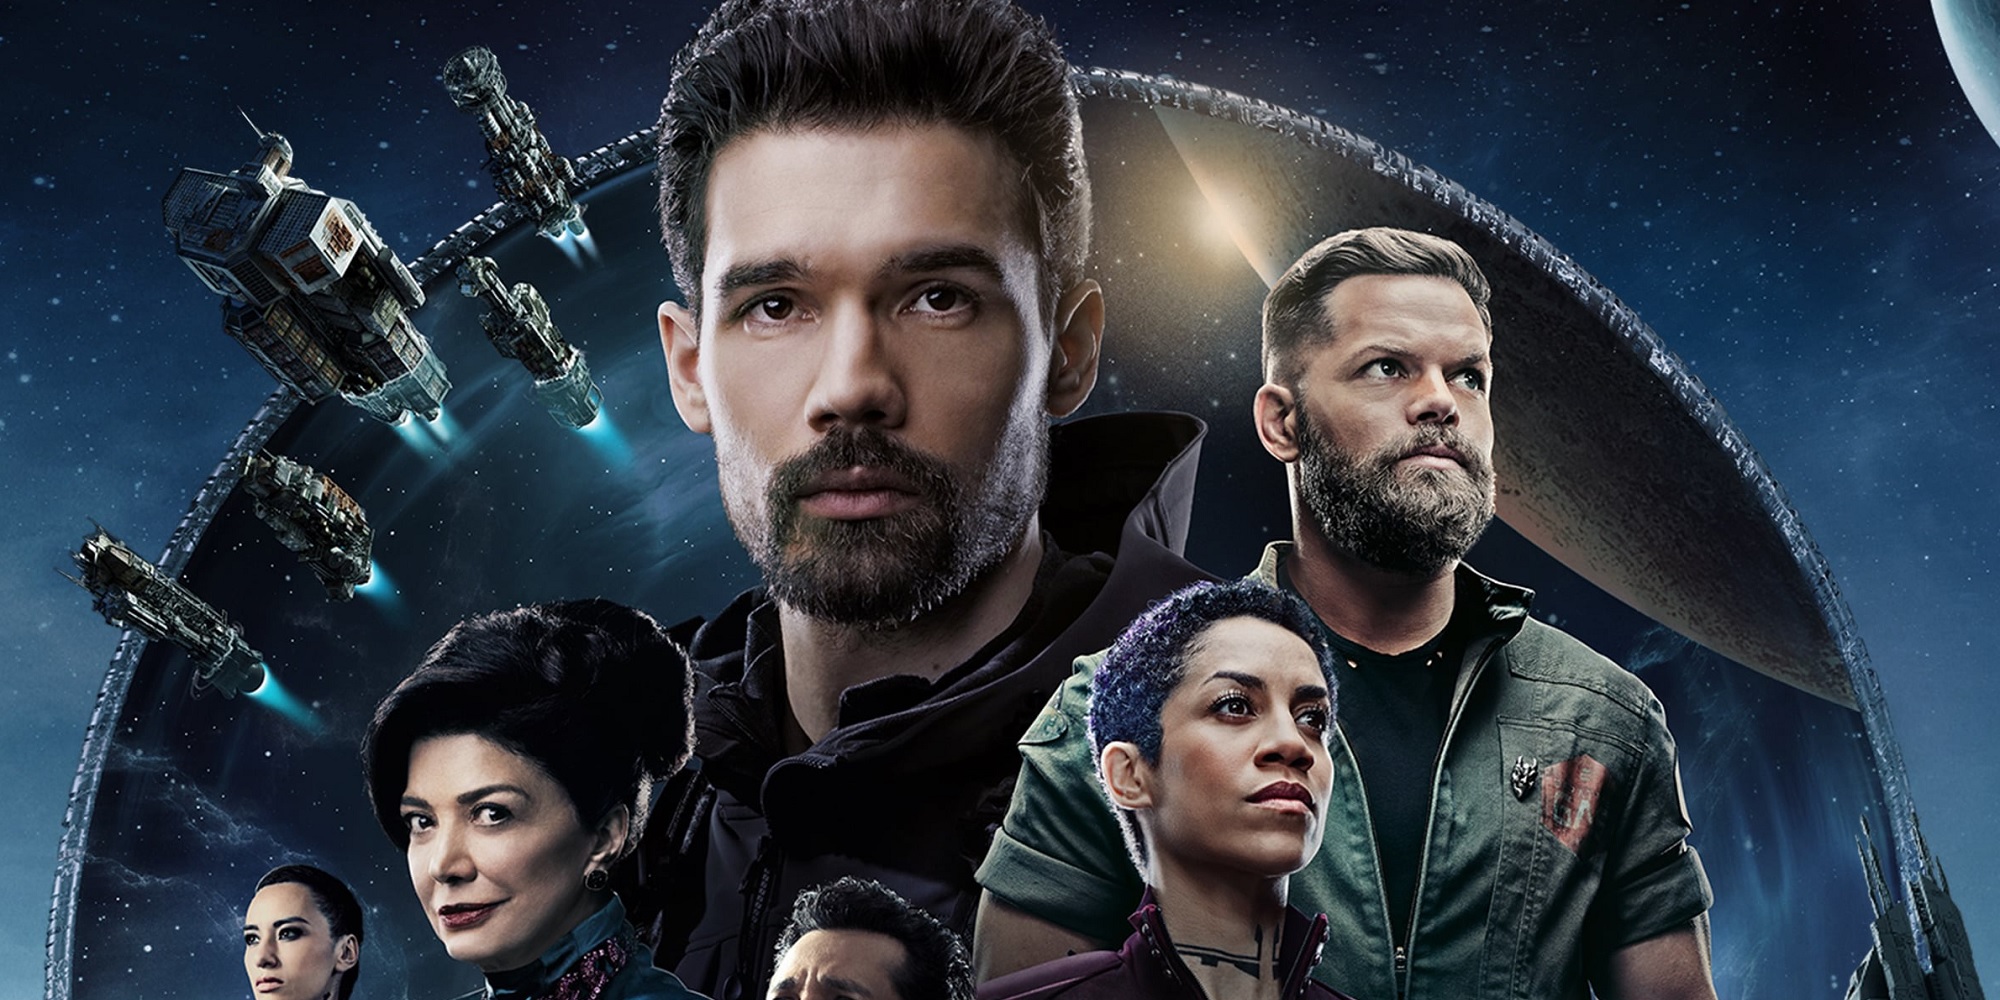 download the expanse new season